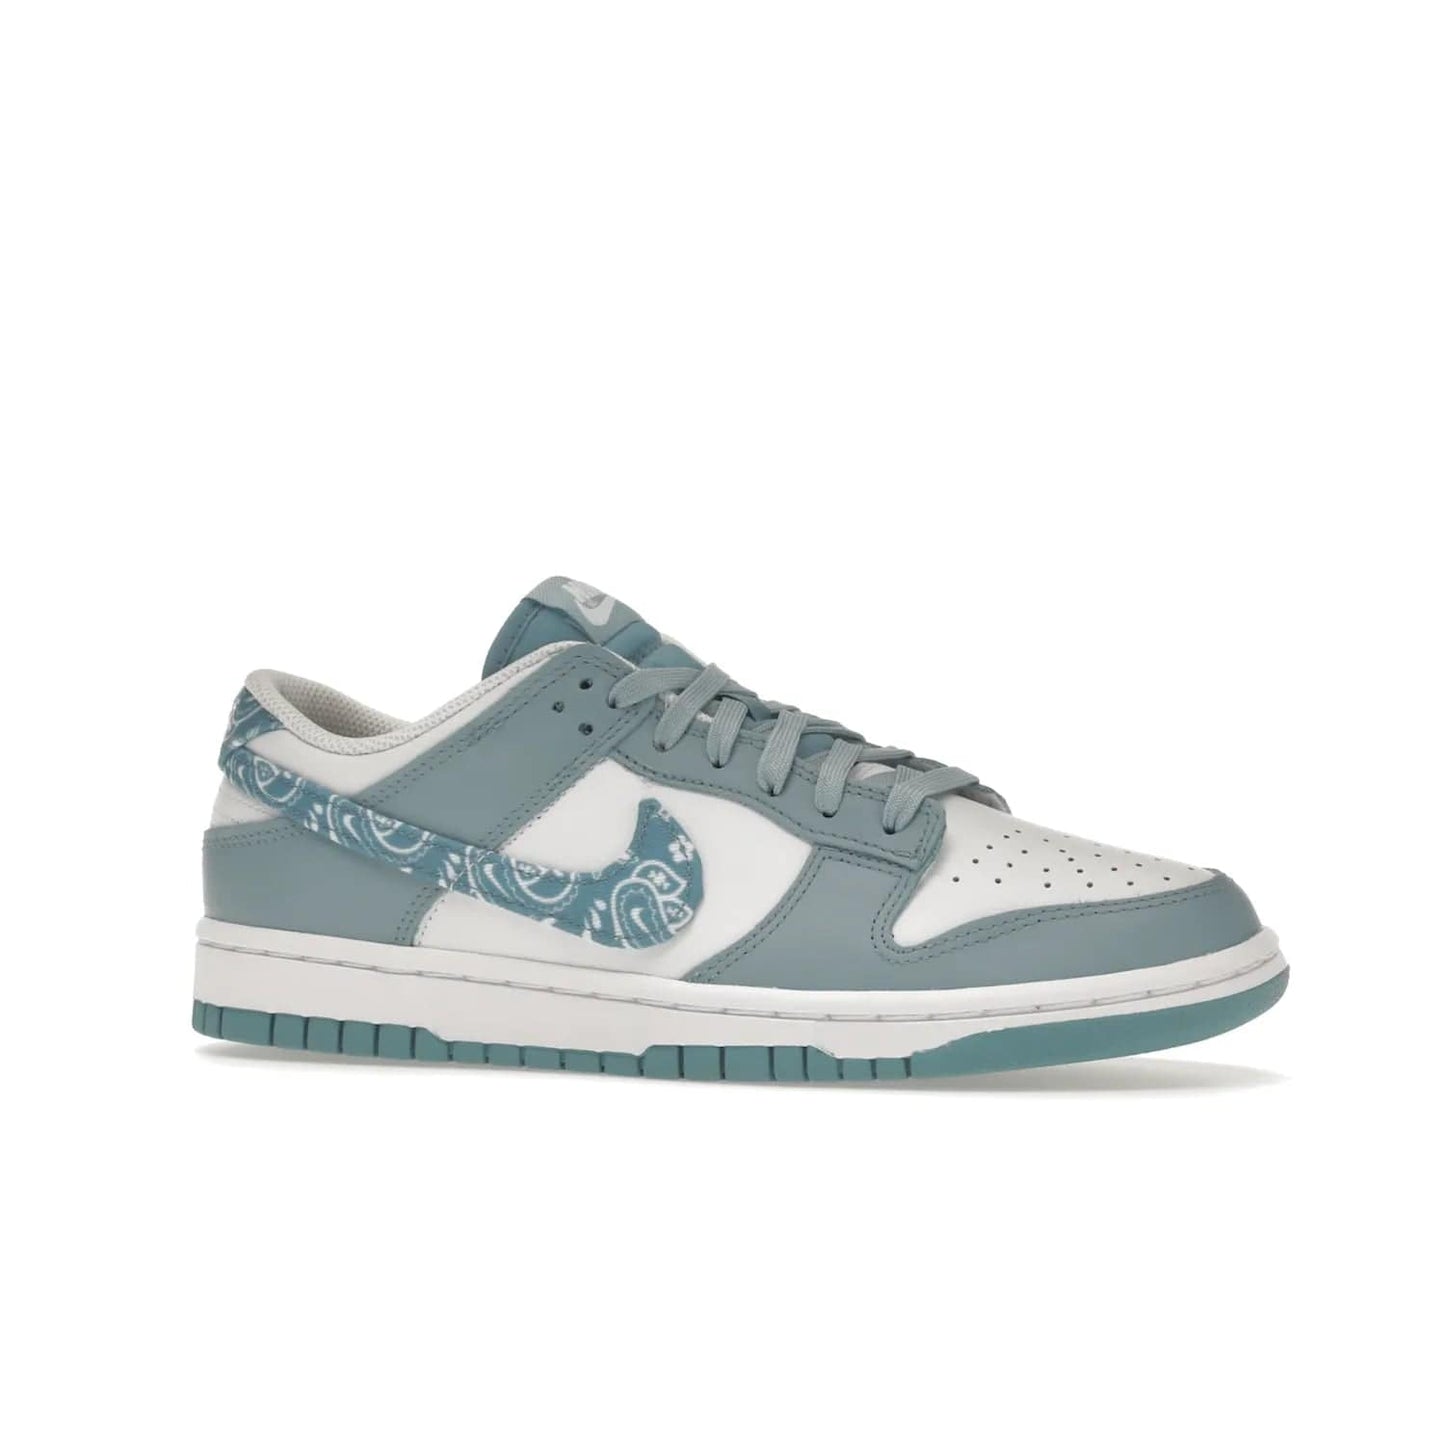 Nike Dunk Low Essential Paisley Pack Worn Blue (Women's) - Image 3 - Only at www.BallersClubKickz.com - Get the Nike Dunk Low Essential Paisley Pack Worn Blue (Women's) for style and comfort. White leather construction, light blue leather overlays, canvas Swooshes and matching heel tabs offer a rich blue hue. Finished by a white and light blue sole, this classic Nike Dunk is the perfect addition to any wardrobe. Released in March 2022.